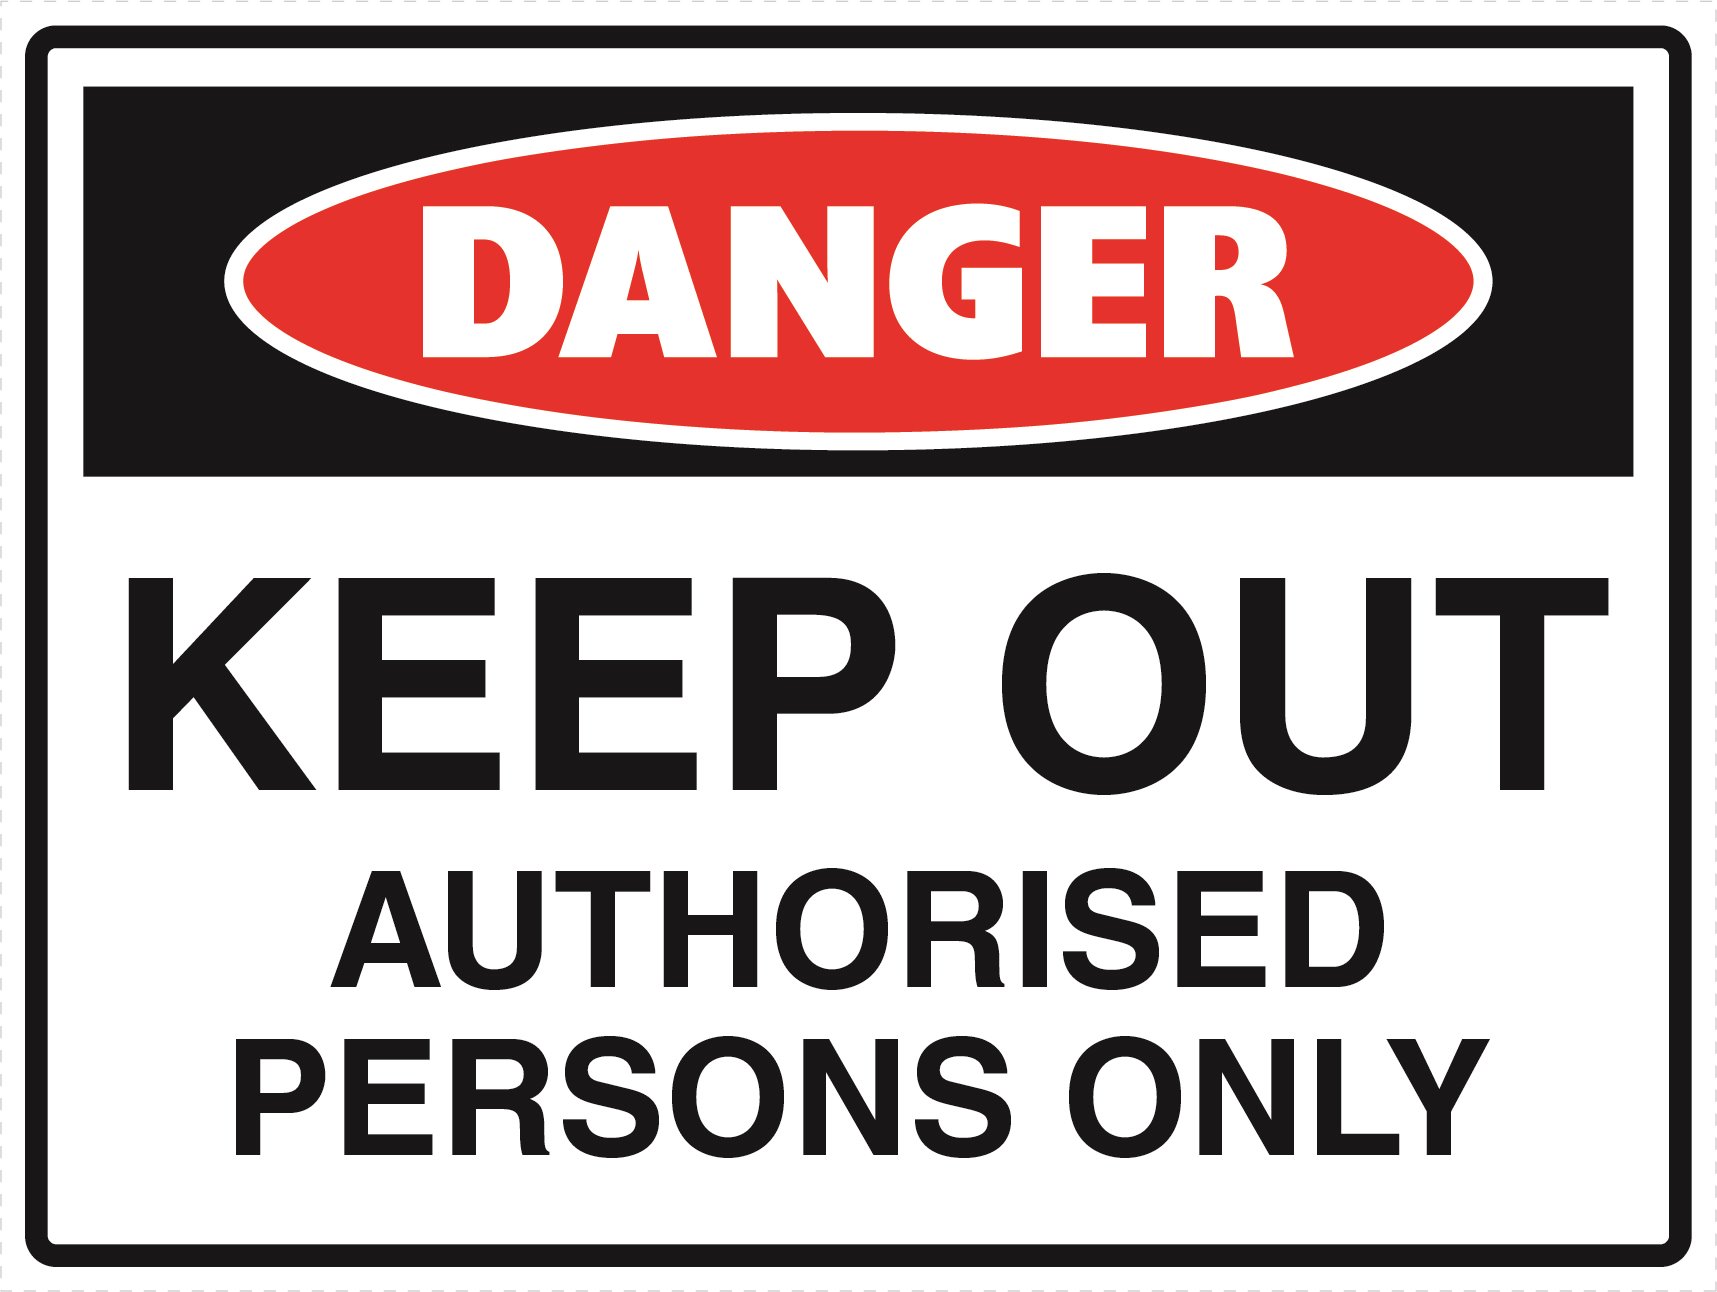 Danger - Keep Out Authorised Persons Only - Metal